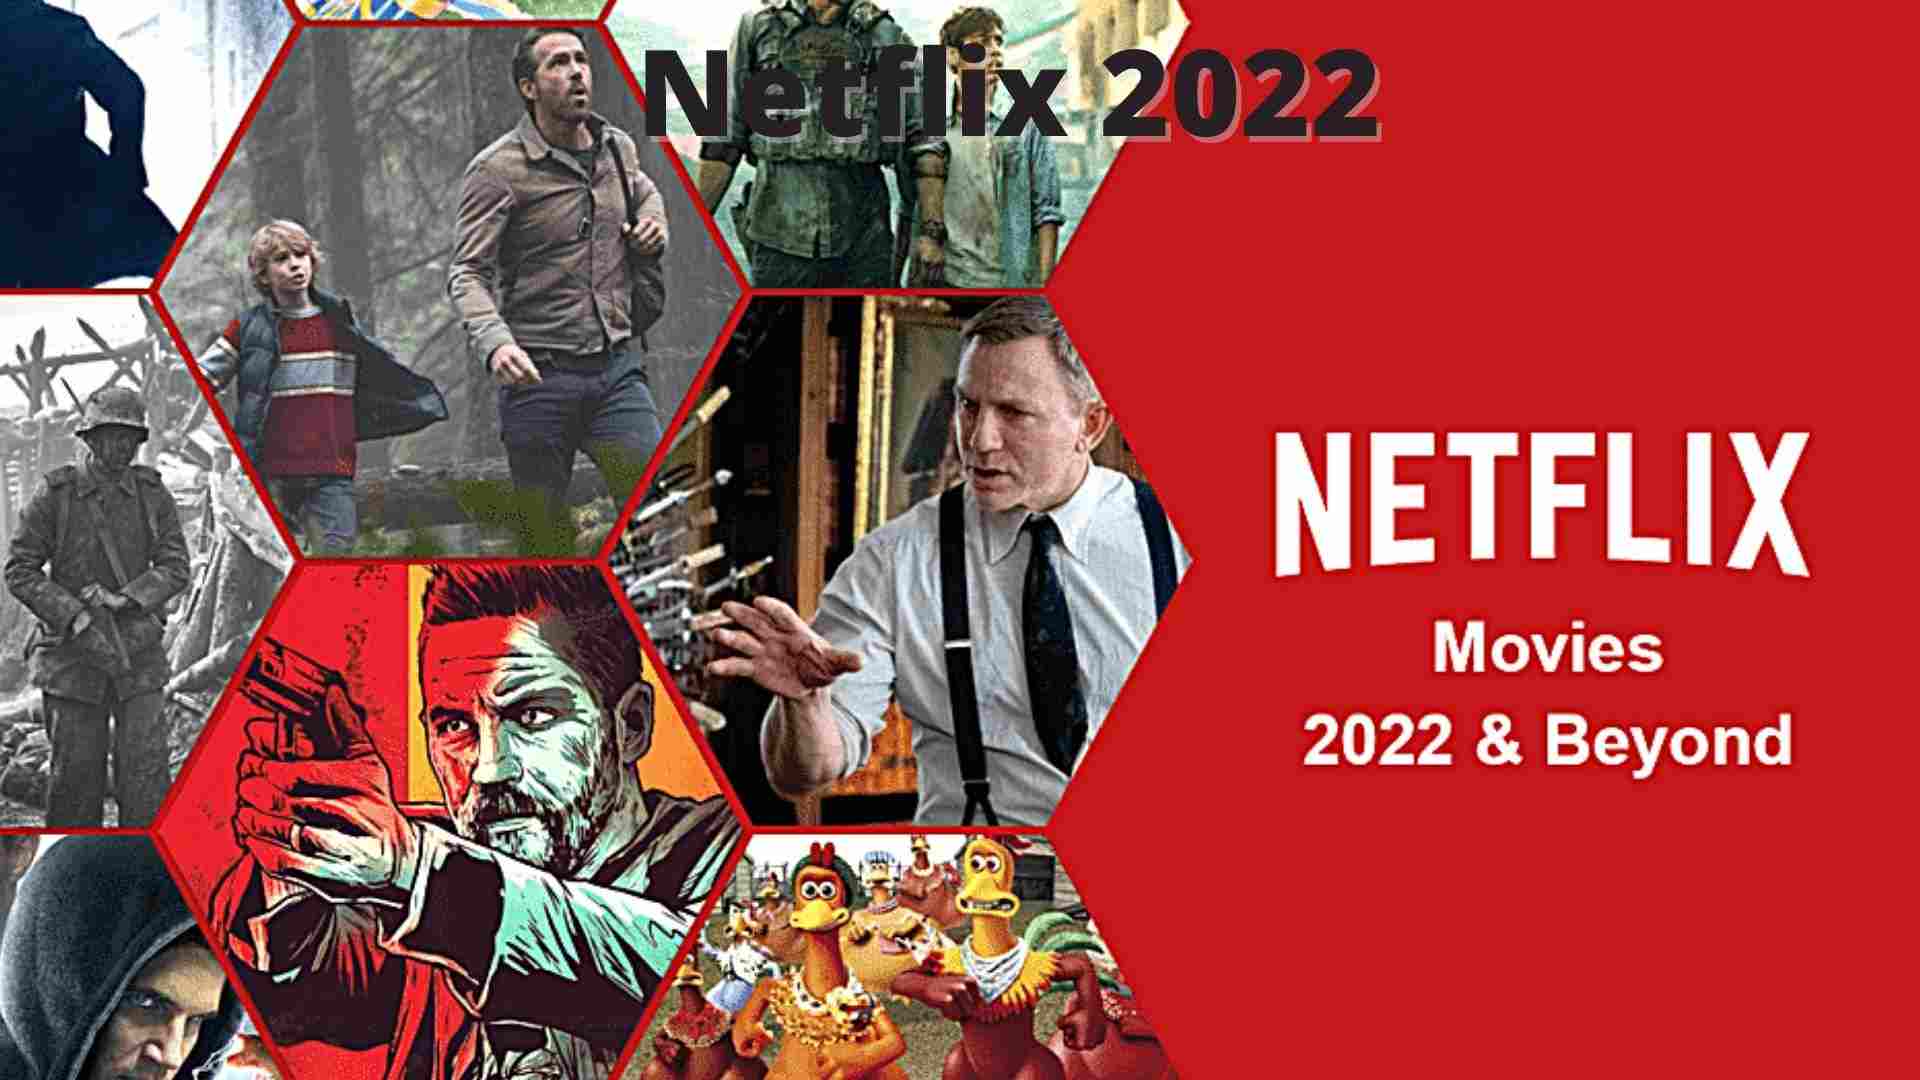 Netflix 2022 is ready with its upcoming movies list